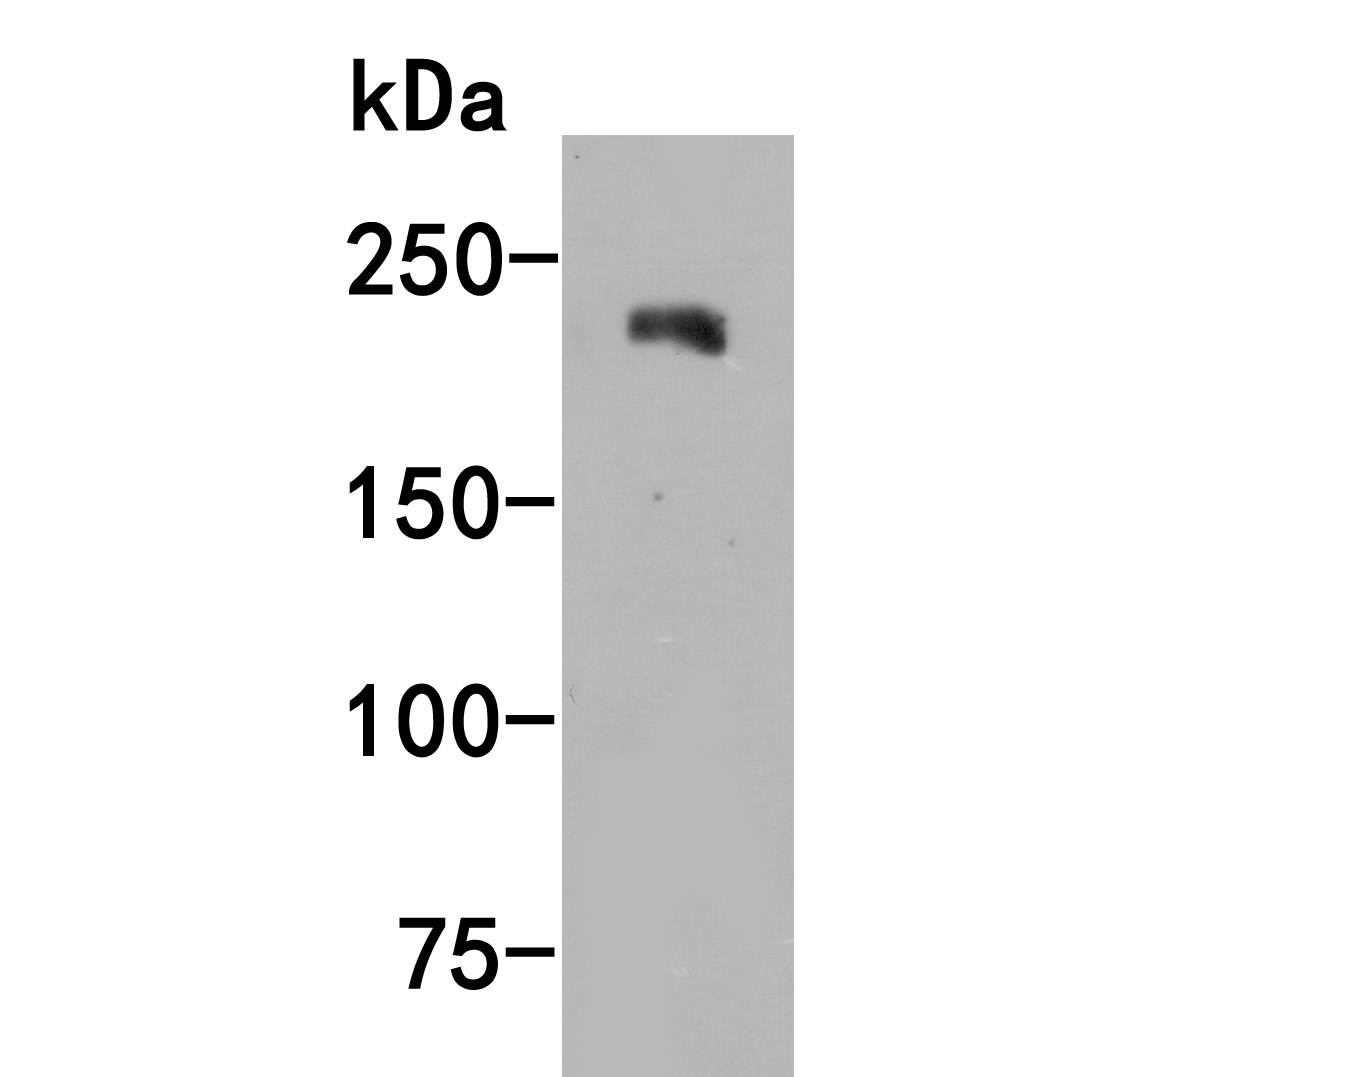 Western blot analysis of Jagged1 on A431 cell lysate. Proteins were transferred to a PVDF membrane and blocked with 5% BSA in PBS for 1 hour at room temperature. The primary antibody (ET1702-63, 1/1,000) was used in 5% BSA at room temperature for 2 hours. Goat Anti-Rabbit IgG - HRP Secondary Antibody (HA1001) at 1:200,000 dilution was used for 1 hour at room temperature.